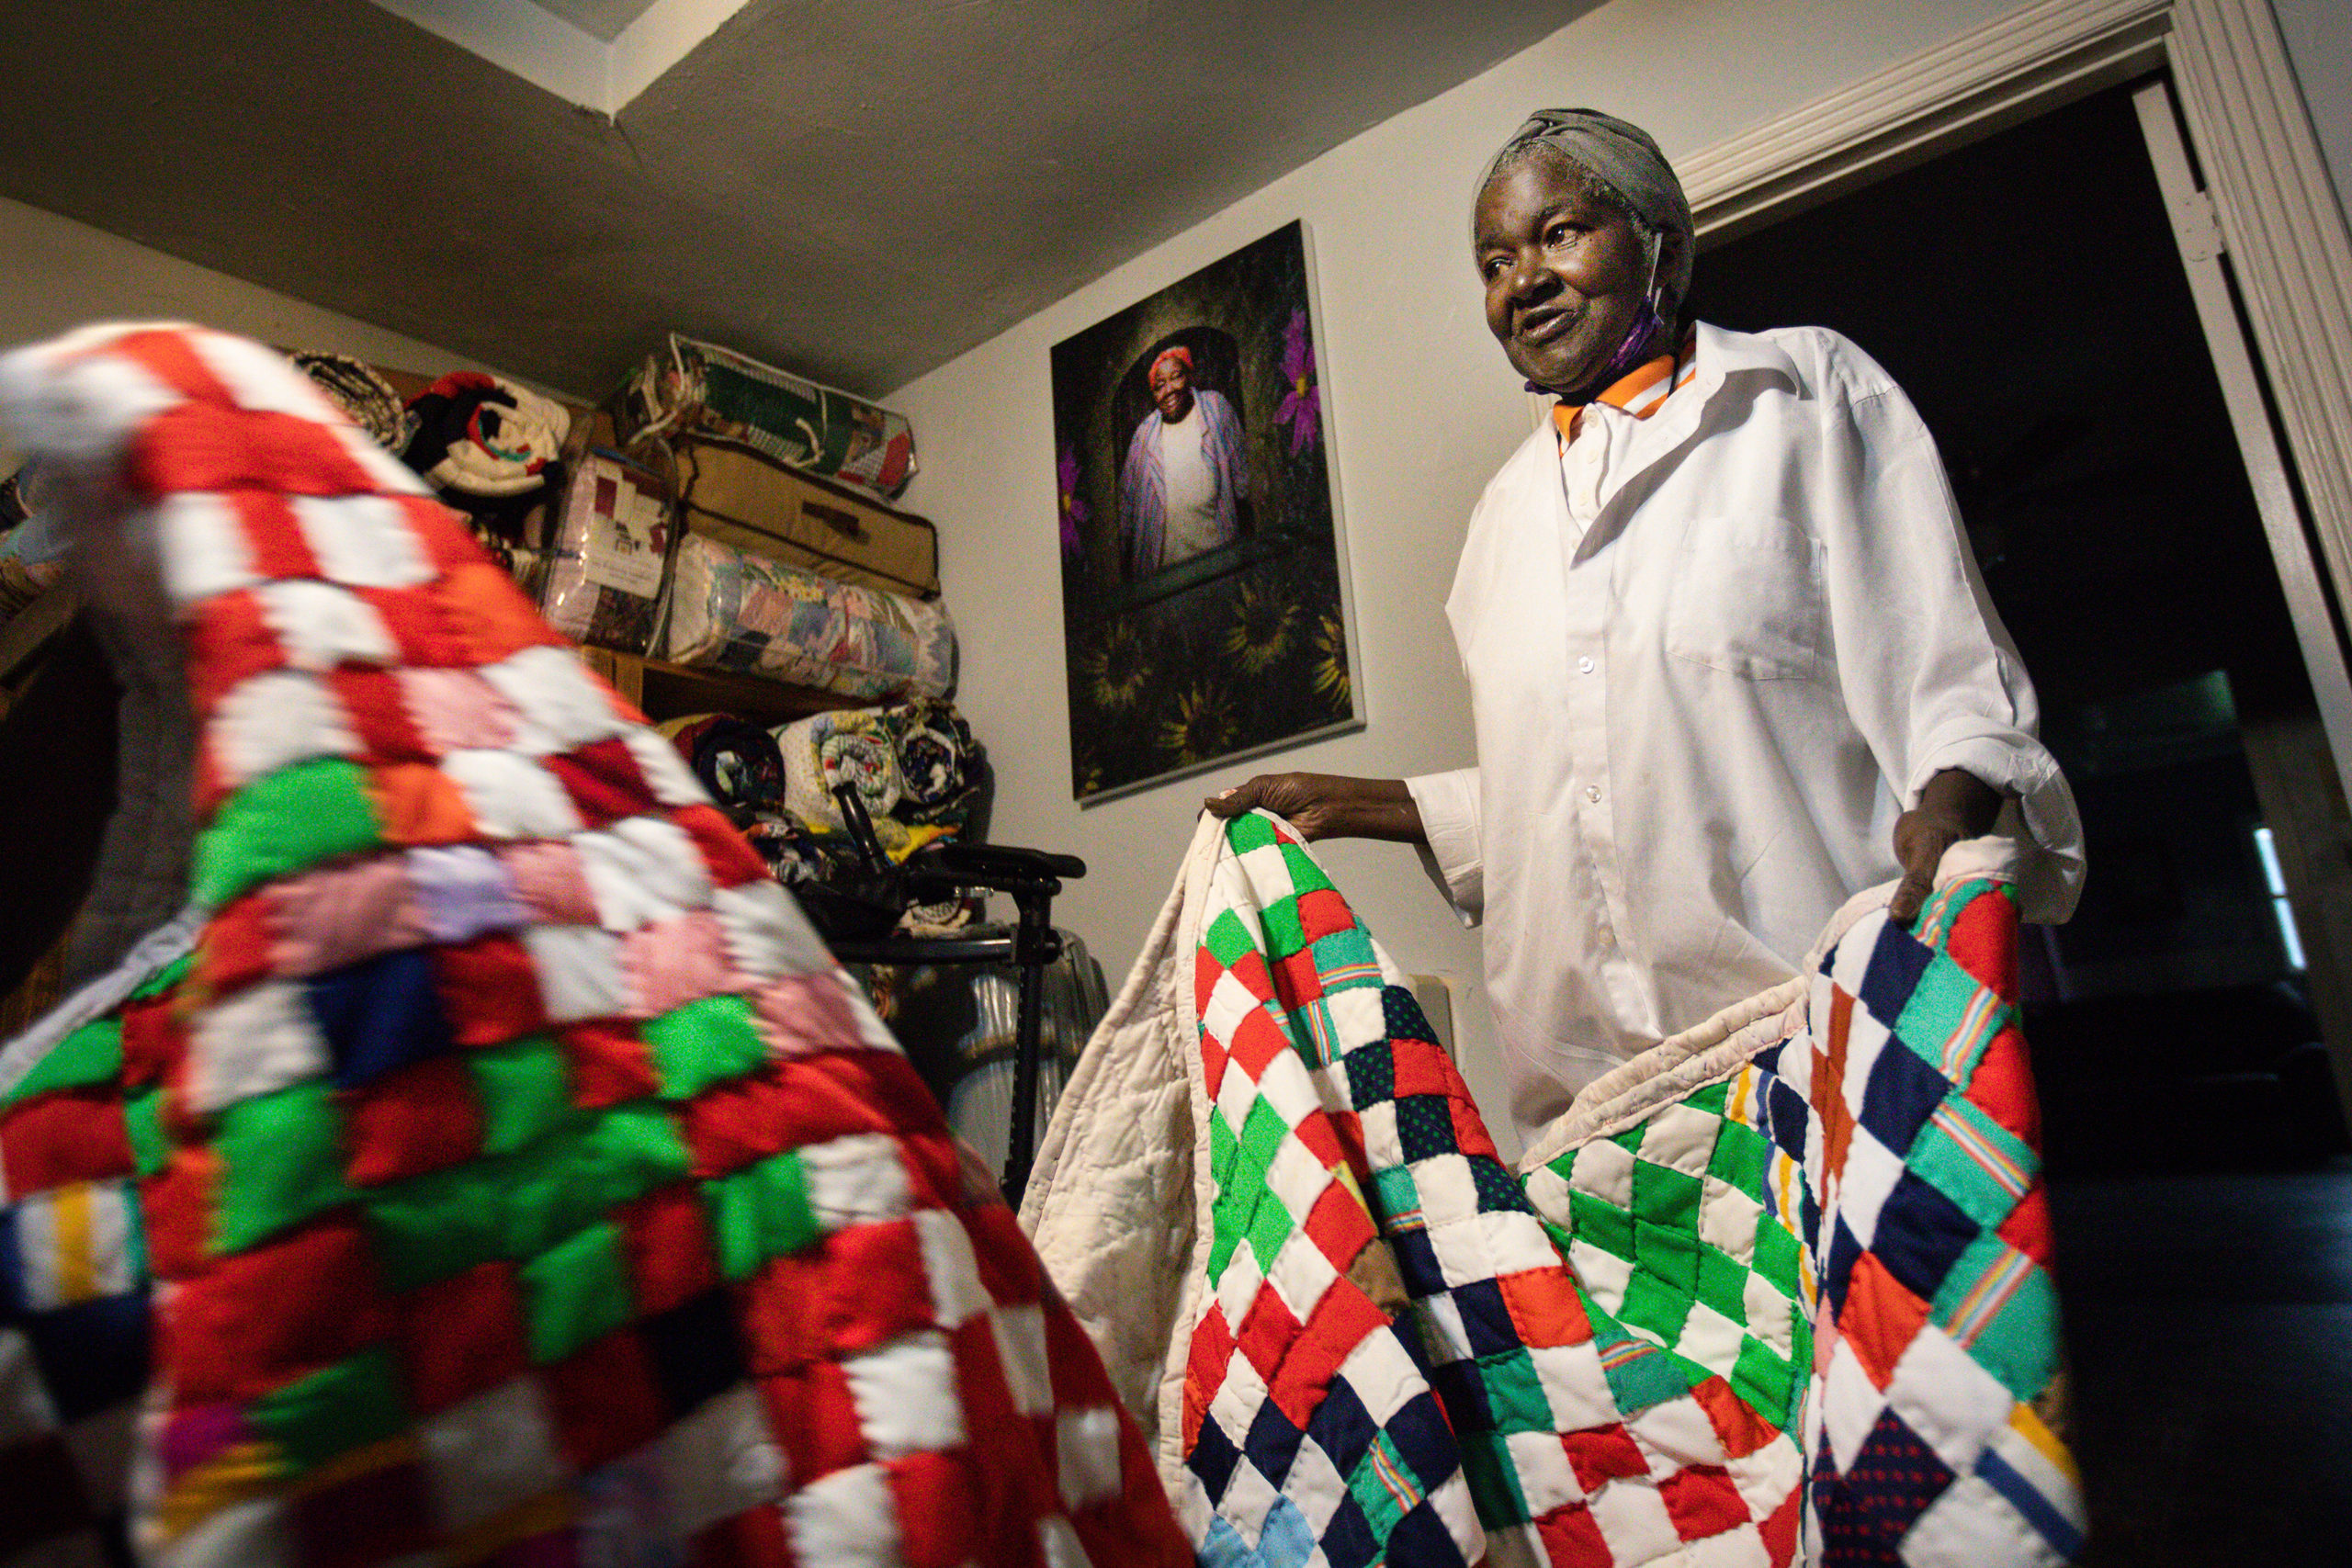 Mays, Brackens’ daughter, holds a quilt containing nine patch blocks made by her late grandmother Gladys Henry.